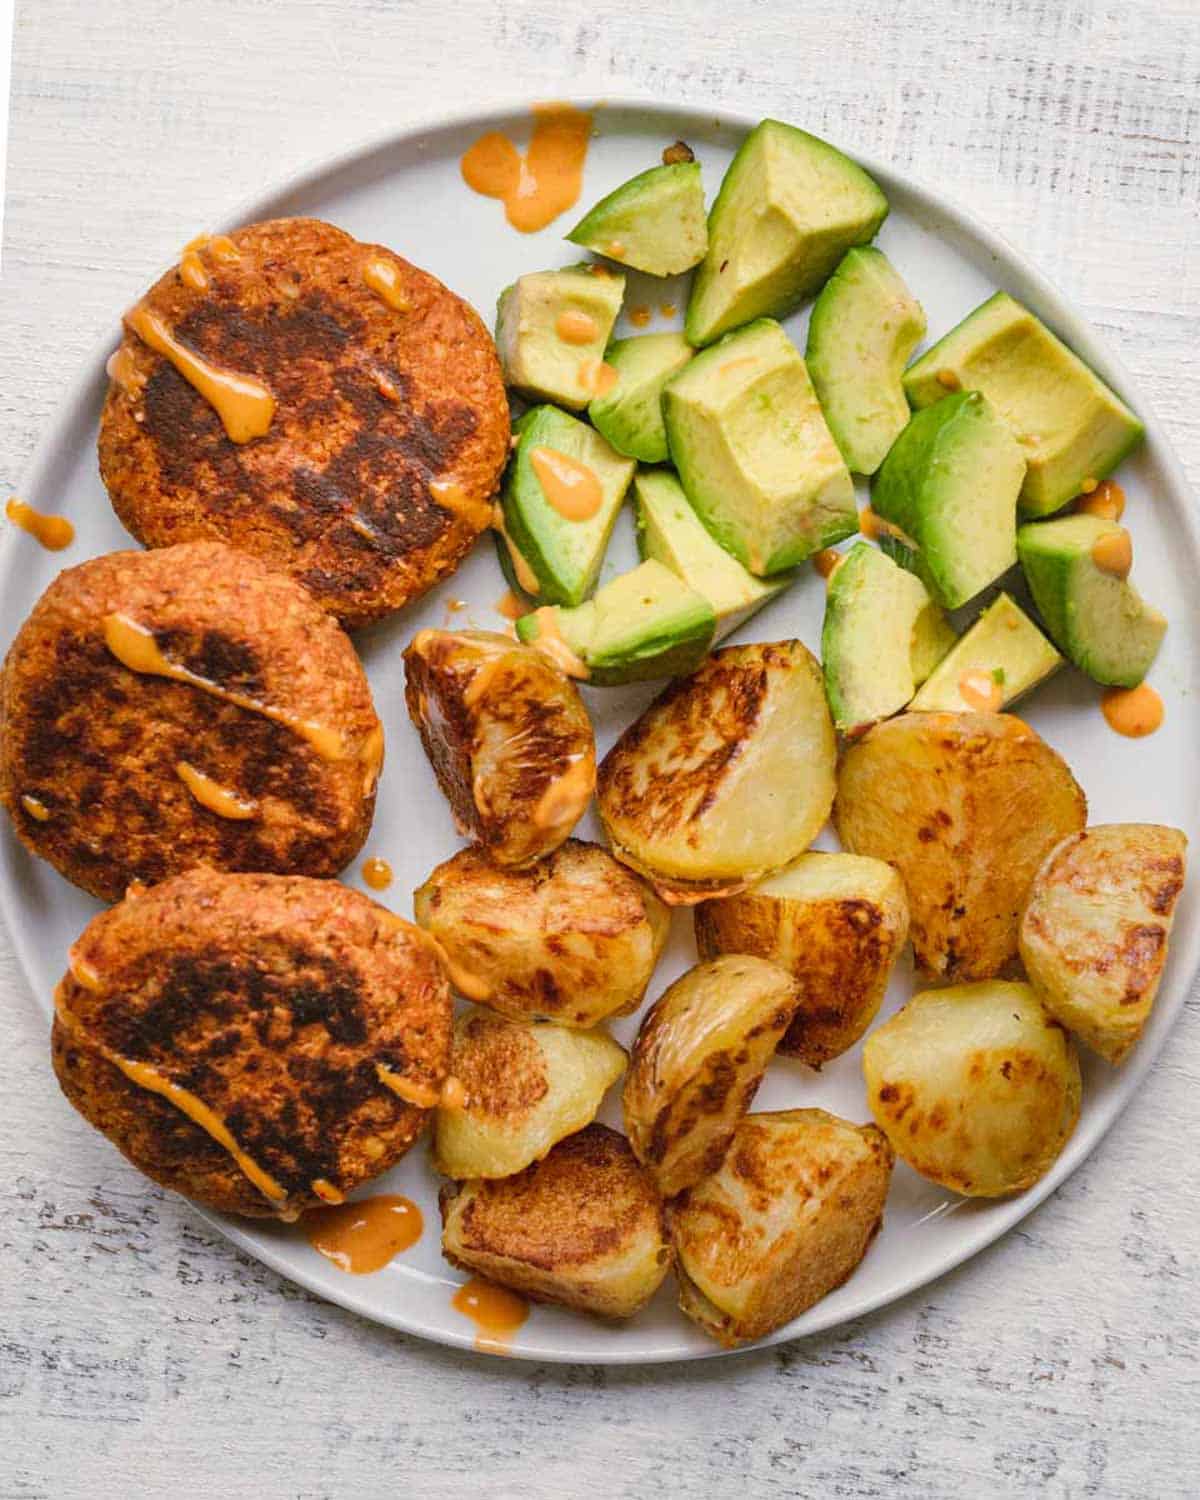 Sun-Dried Tomato Tempeh Burgers with crispy oven-baked potatoes and avocado chunks.